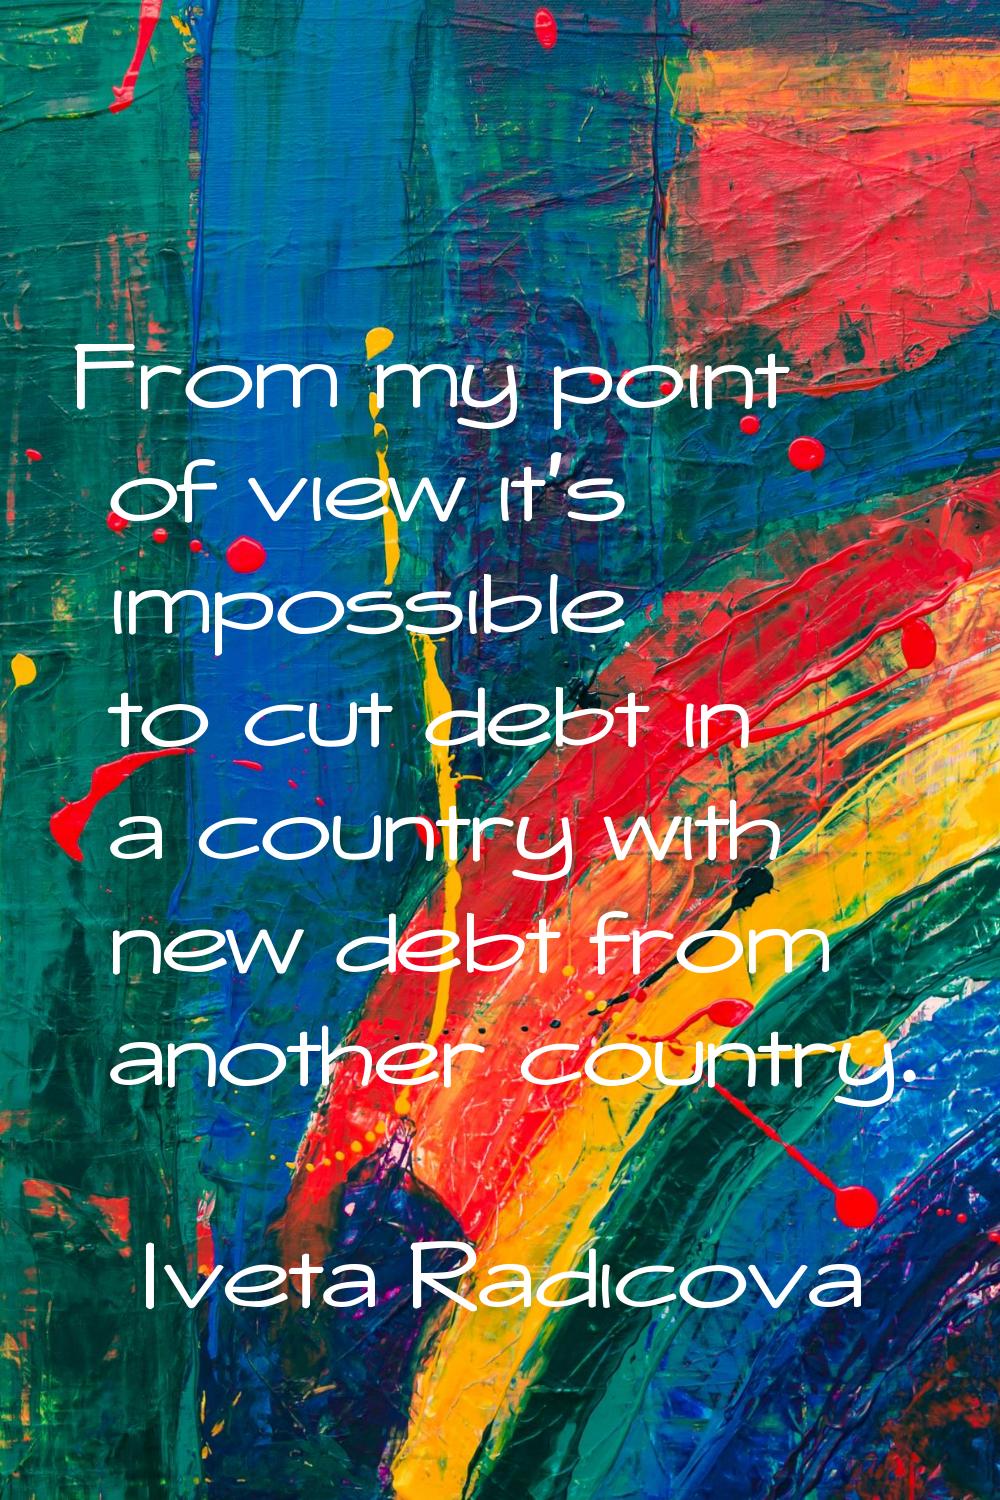 From my point of view it's impossible to cut debt in a country with new debt from another country.